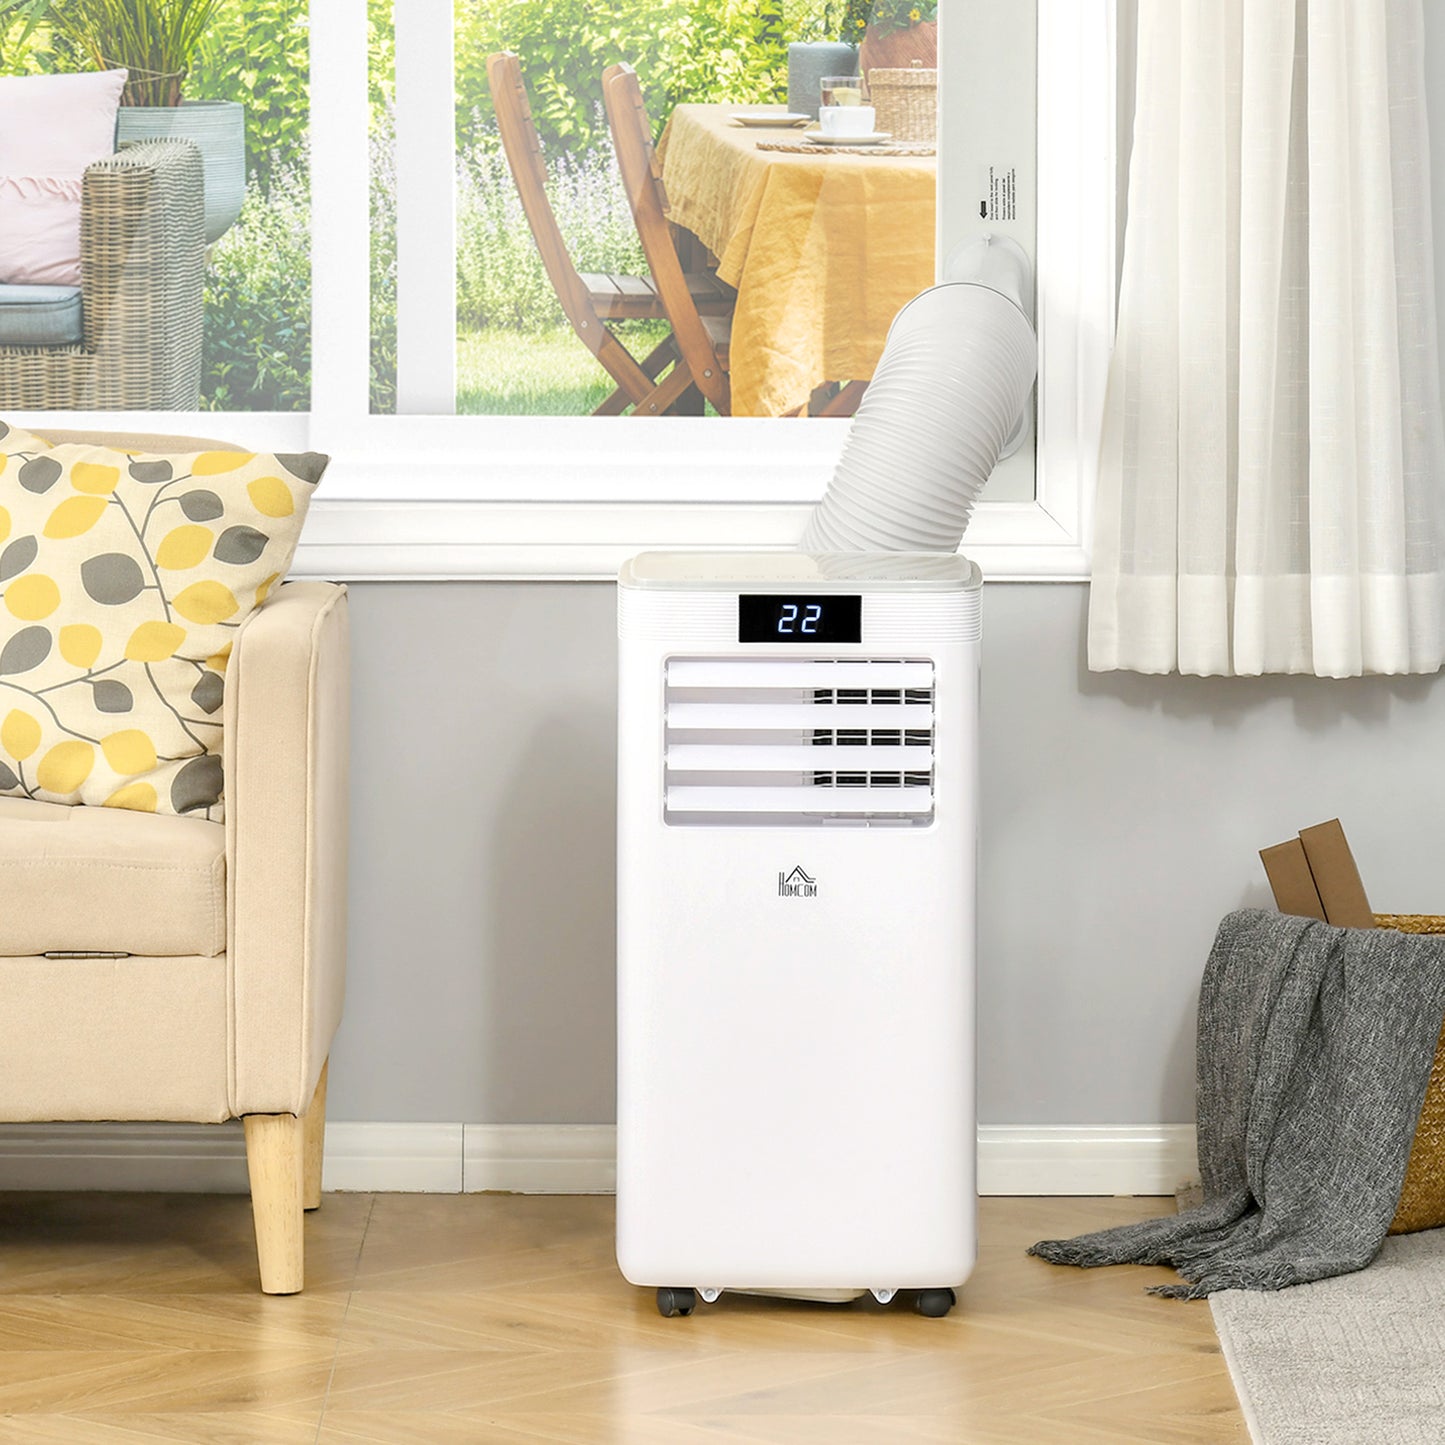 HOMCOM 10000 BTU Mobile Air Conditioner Portable AC Unit for Cooling Dehumidifying Ventilating with Remote Controller, LED Displa, White